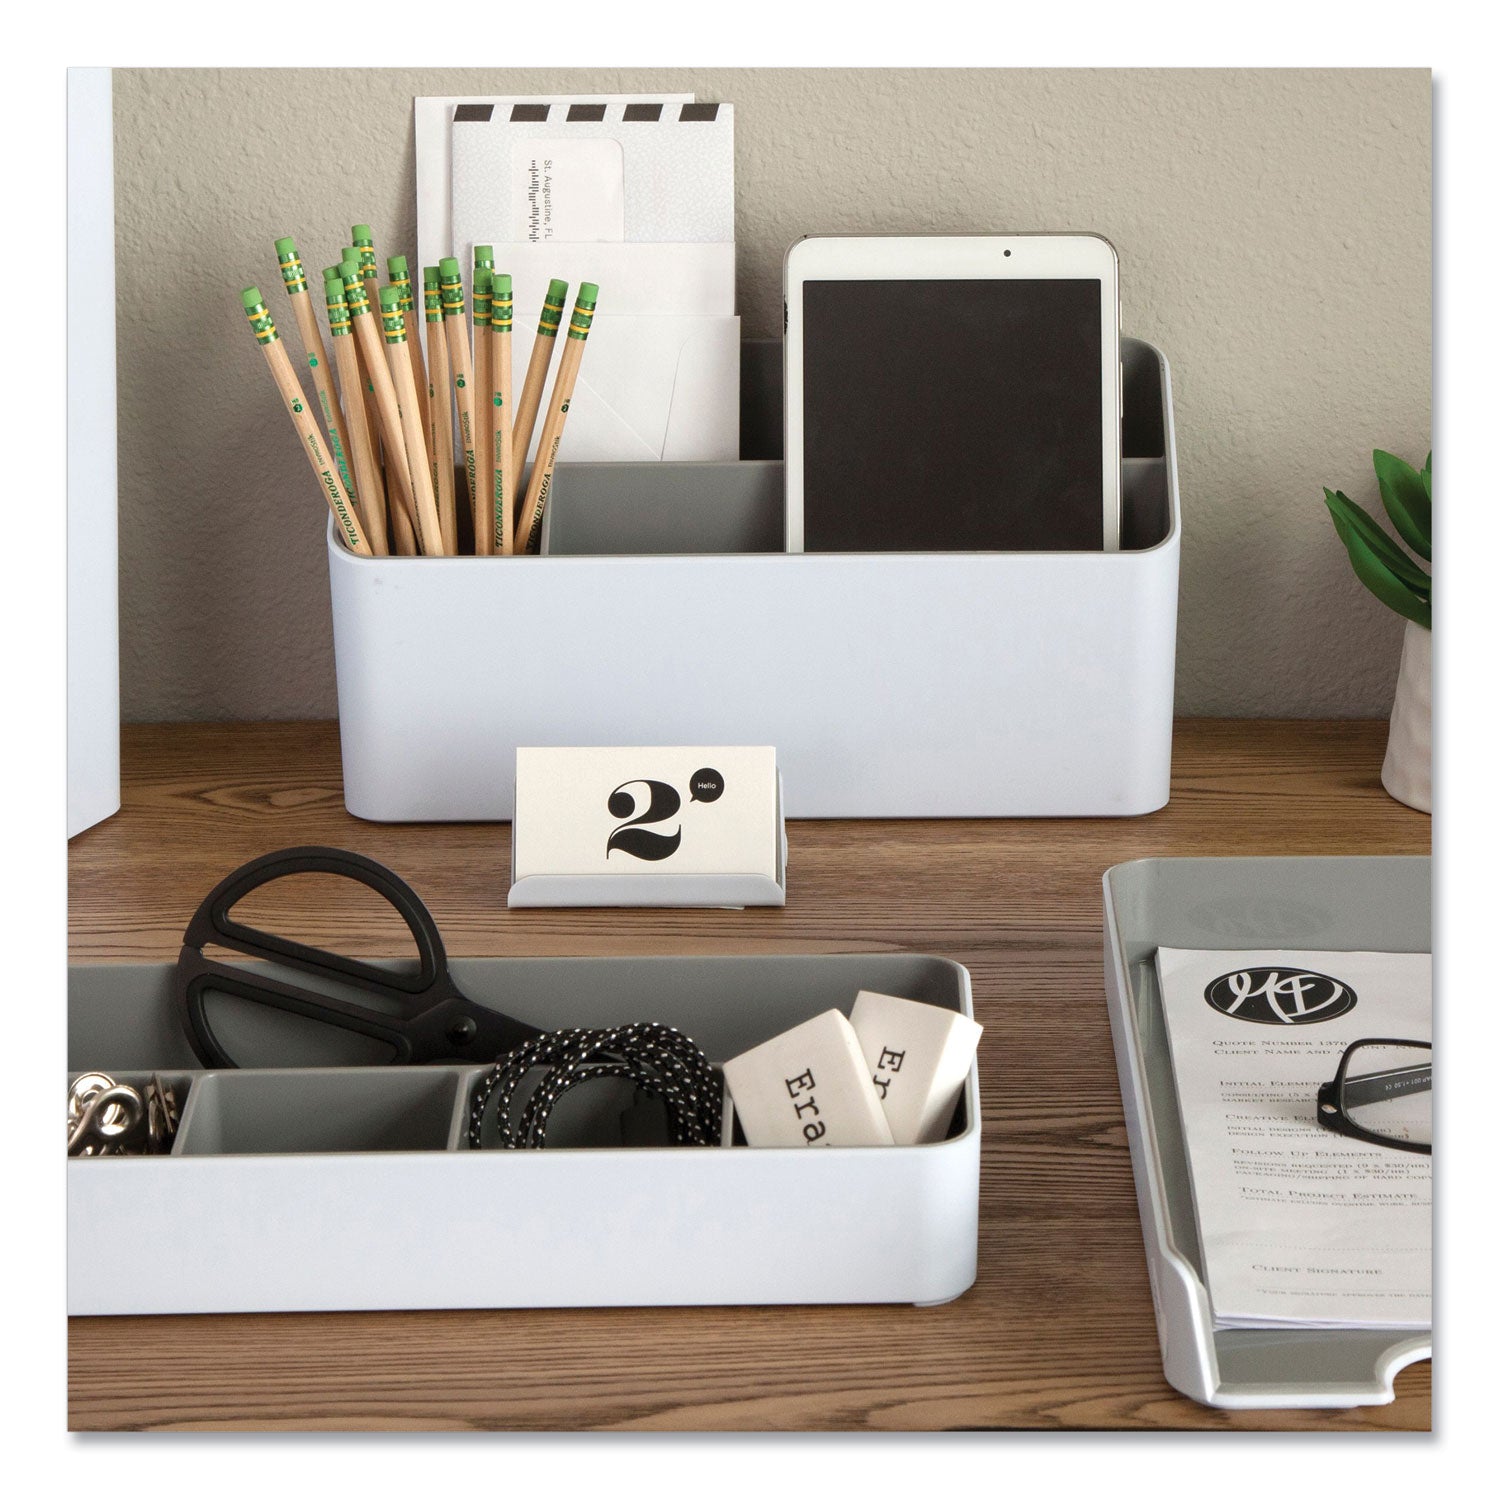 fusion-stacking-bins-4-compartments-plastic-121-x-91-x-22-white-gray-4-pieces_avt37592 - 4